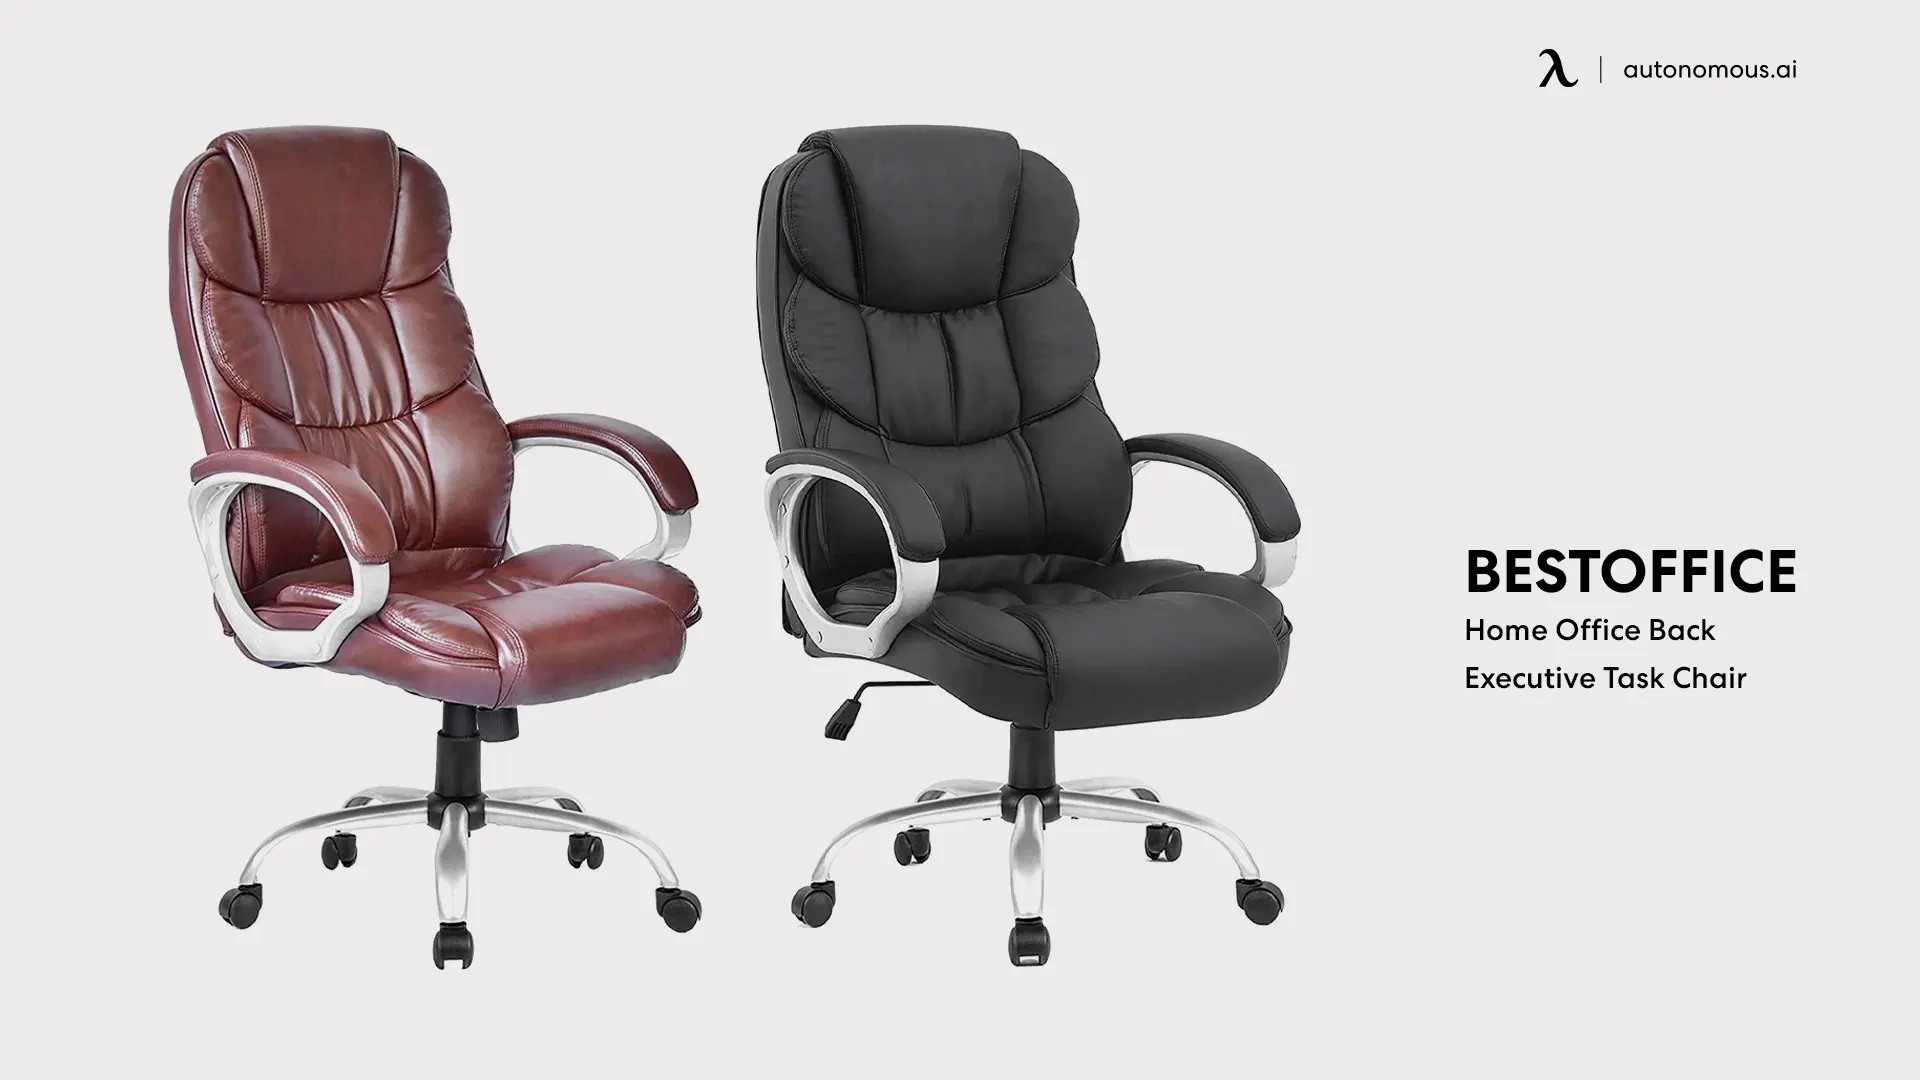 Home Office Back Executive Task Chair